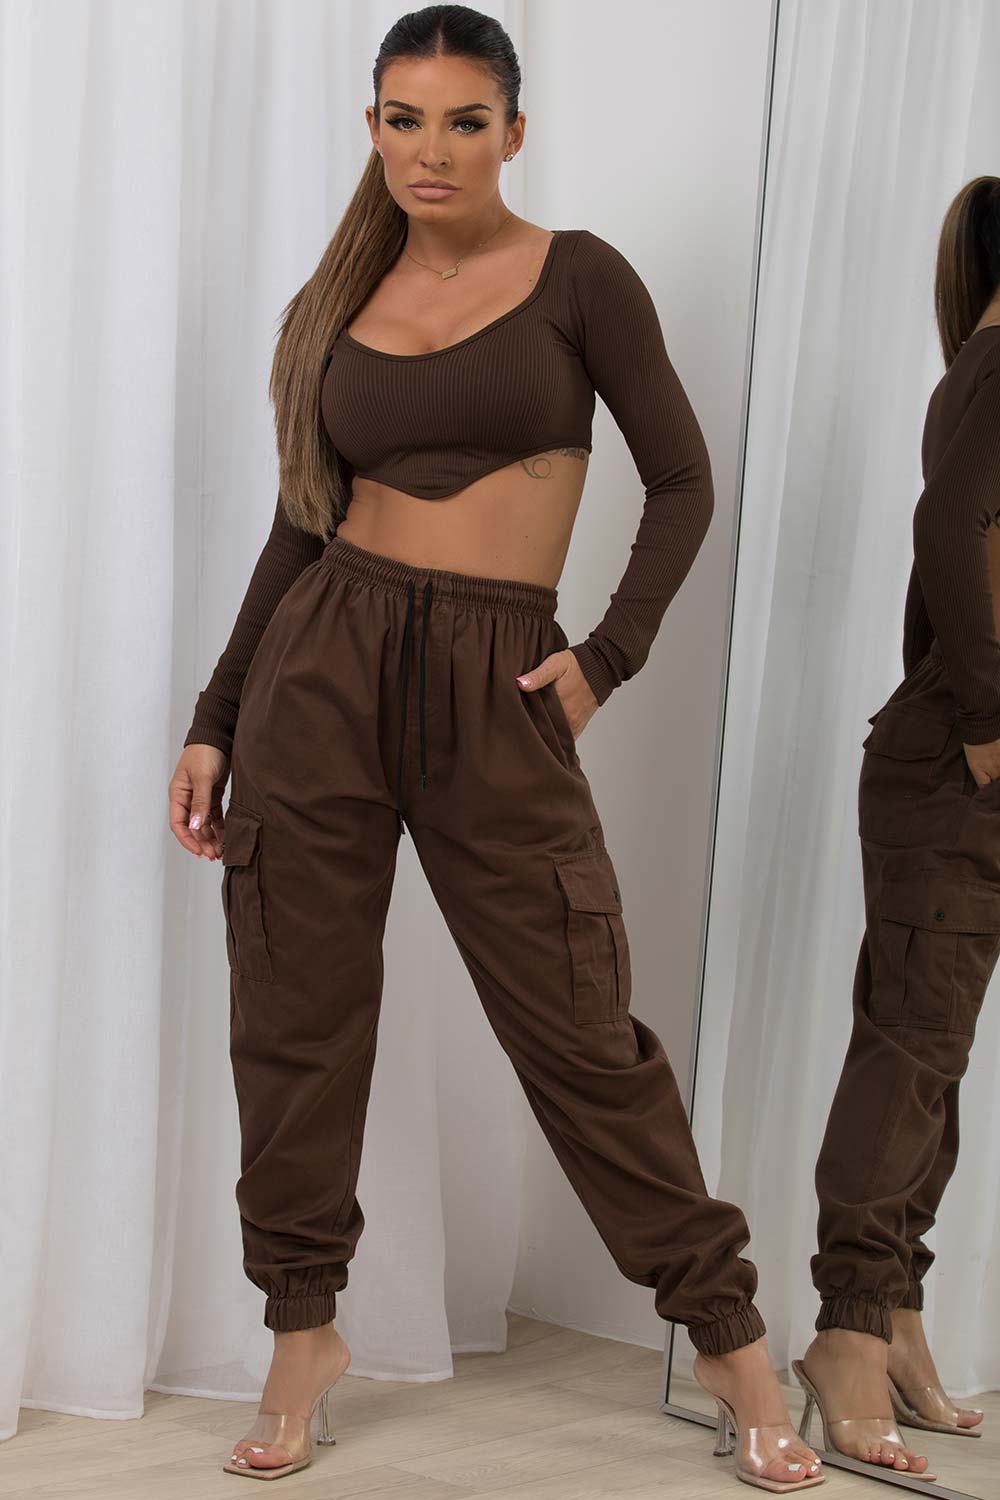 Women's Cargo Trousers With Cuffed Bottoms Brown –